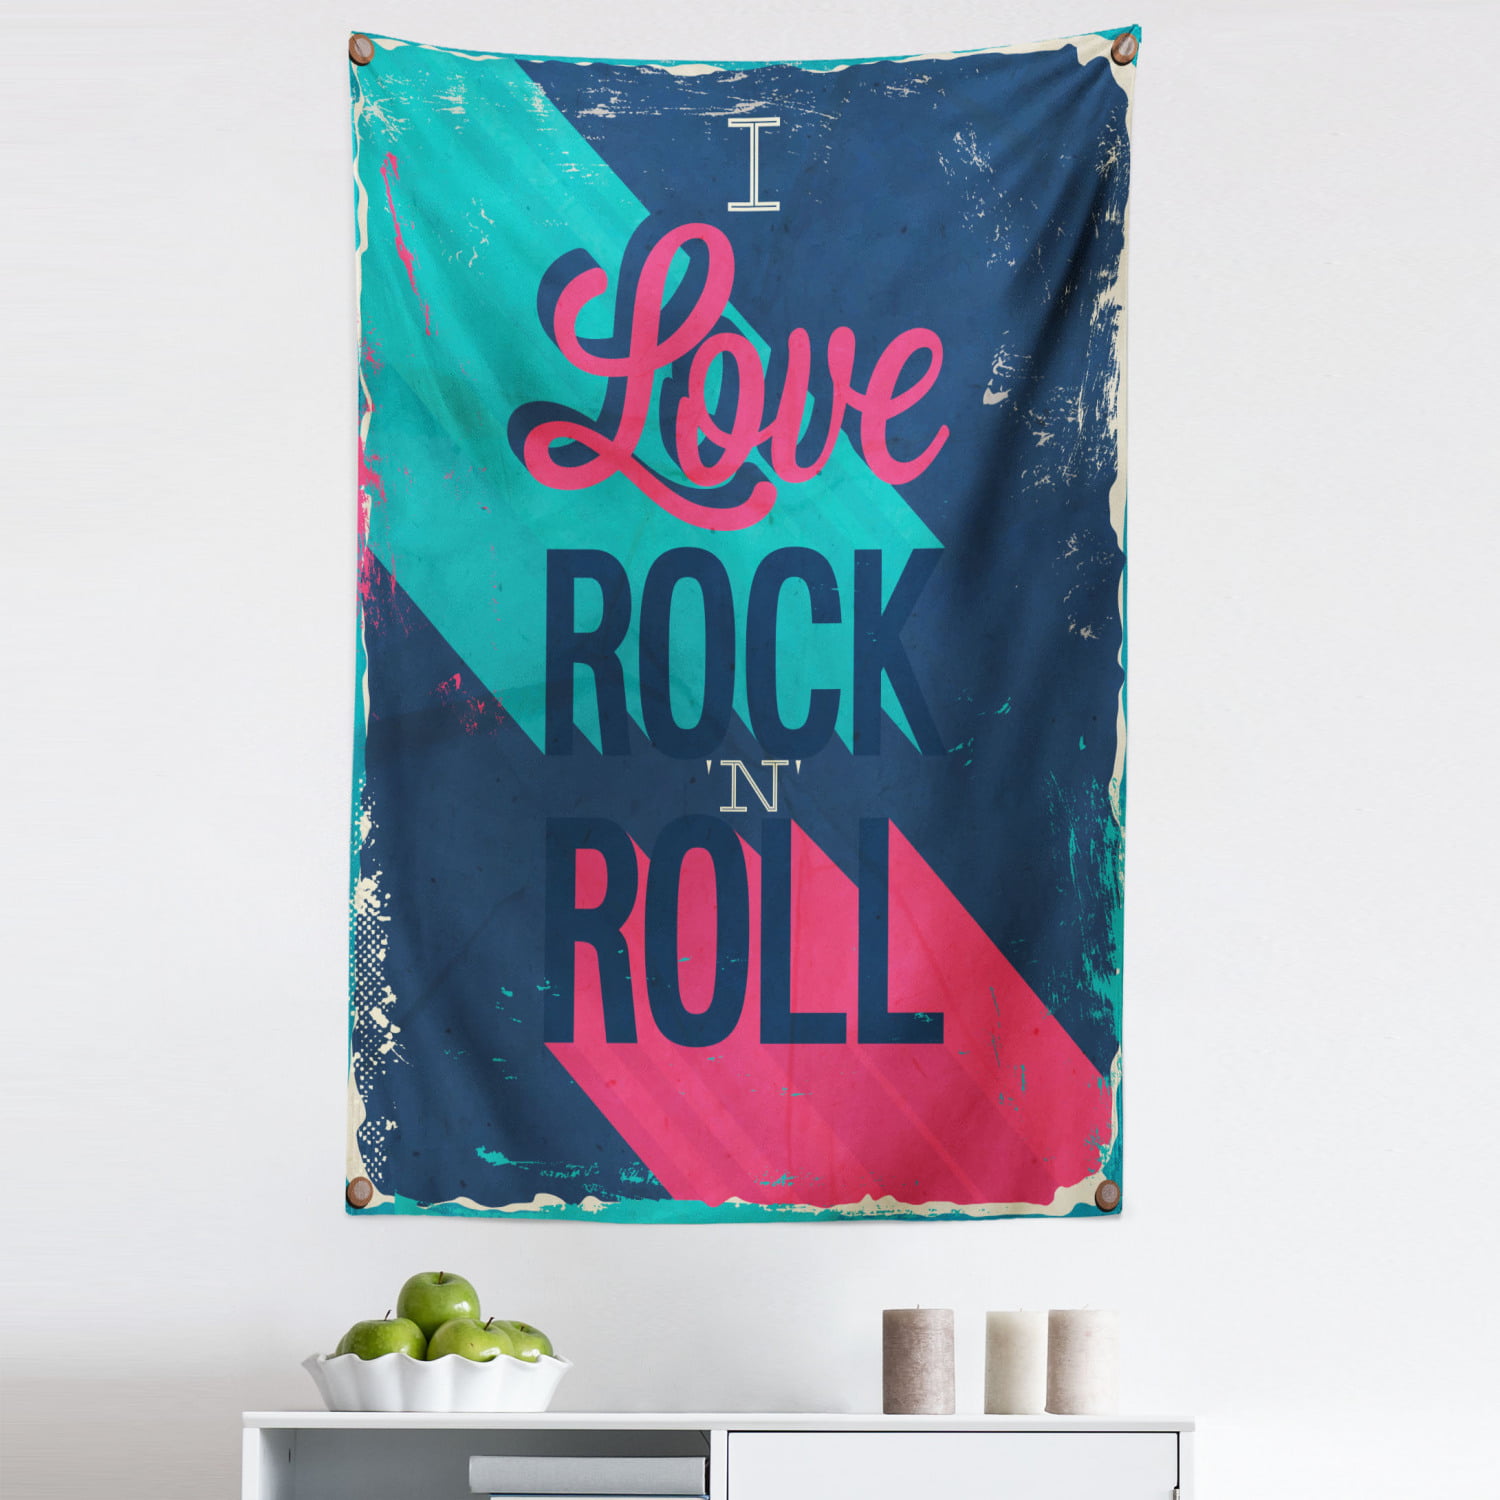 Rock N Roll Design Small Tapestry Wall Hanging Blue Color Poster Cotton Fabric 